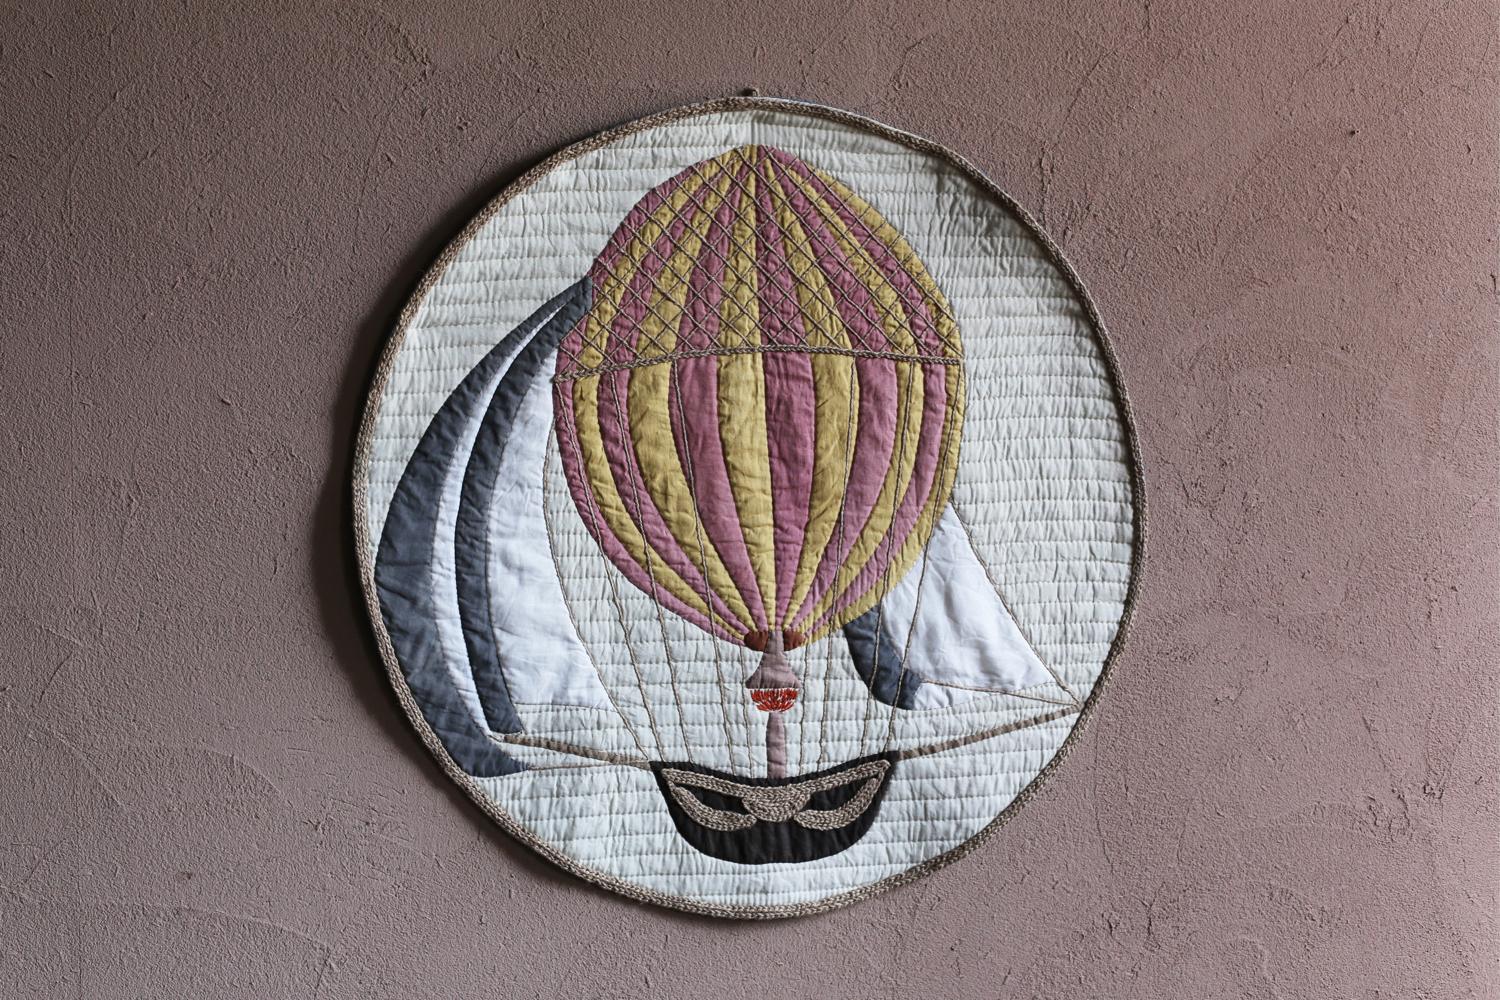 Title : Balloon 
Japan / 2021s
Size : W 1000 H 1000 mm

This quilt is made with french linen and organic cotton.
Hand quilted with cotton thread and Uses hand-knitted hemp strings.
Hand dyed with madder and pomegranate,
tingi (A kind of bark